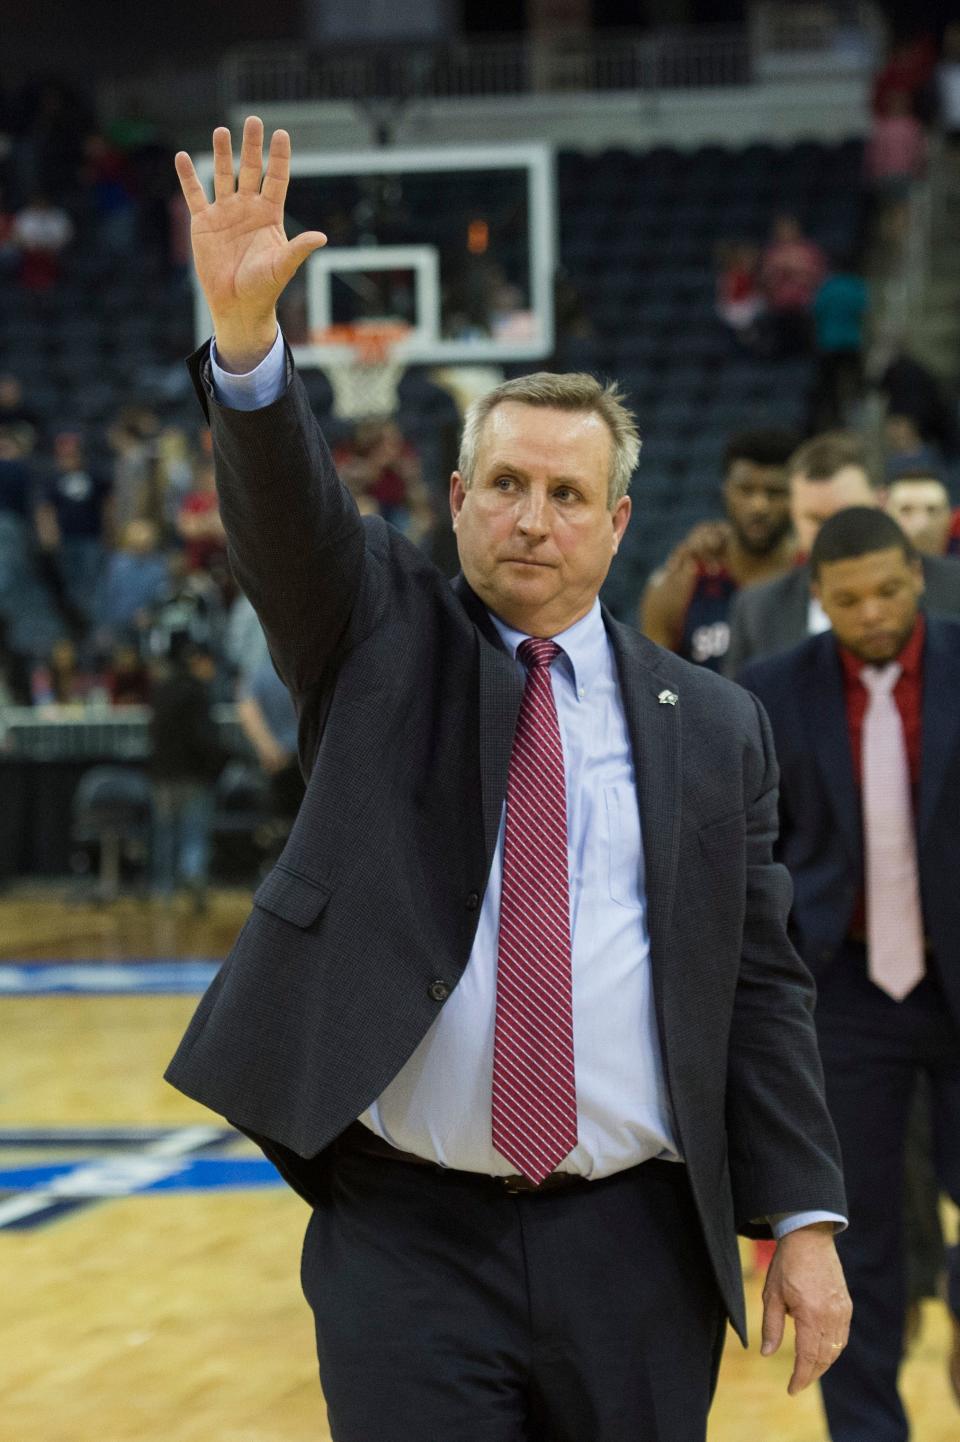 University of Southern Indiana Head Coach Rodney Watson waves to the crowd as he leaves the court during the NCAA Division II Final Four men's basketball tournament at Ford Center in Evansville, Ind., Thursday, March 28, 2019. The Screaming Eagles fell to the Point Loma Sea Lions, 81-71. 